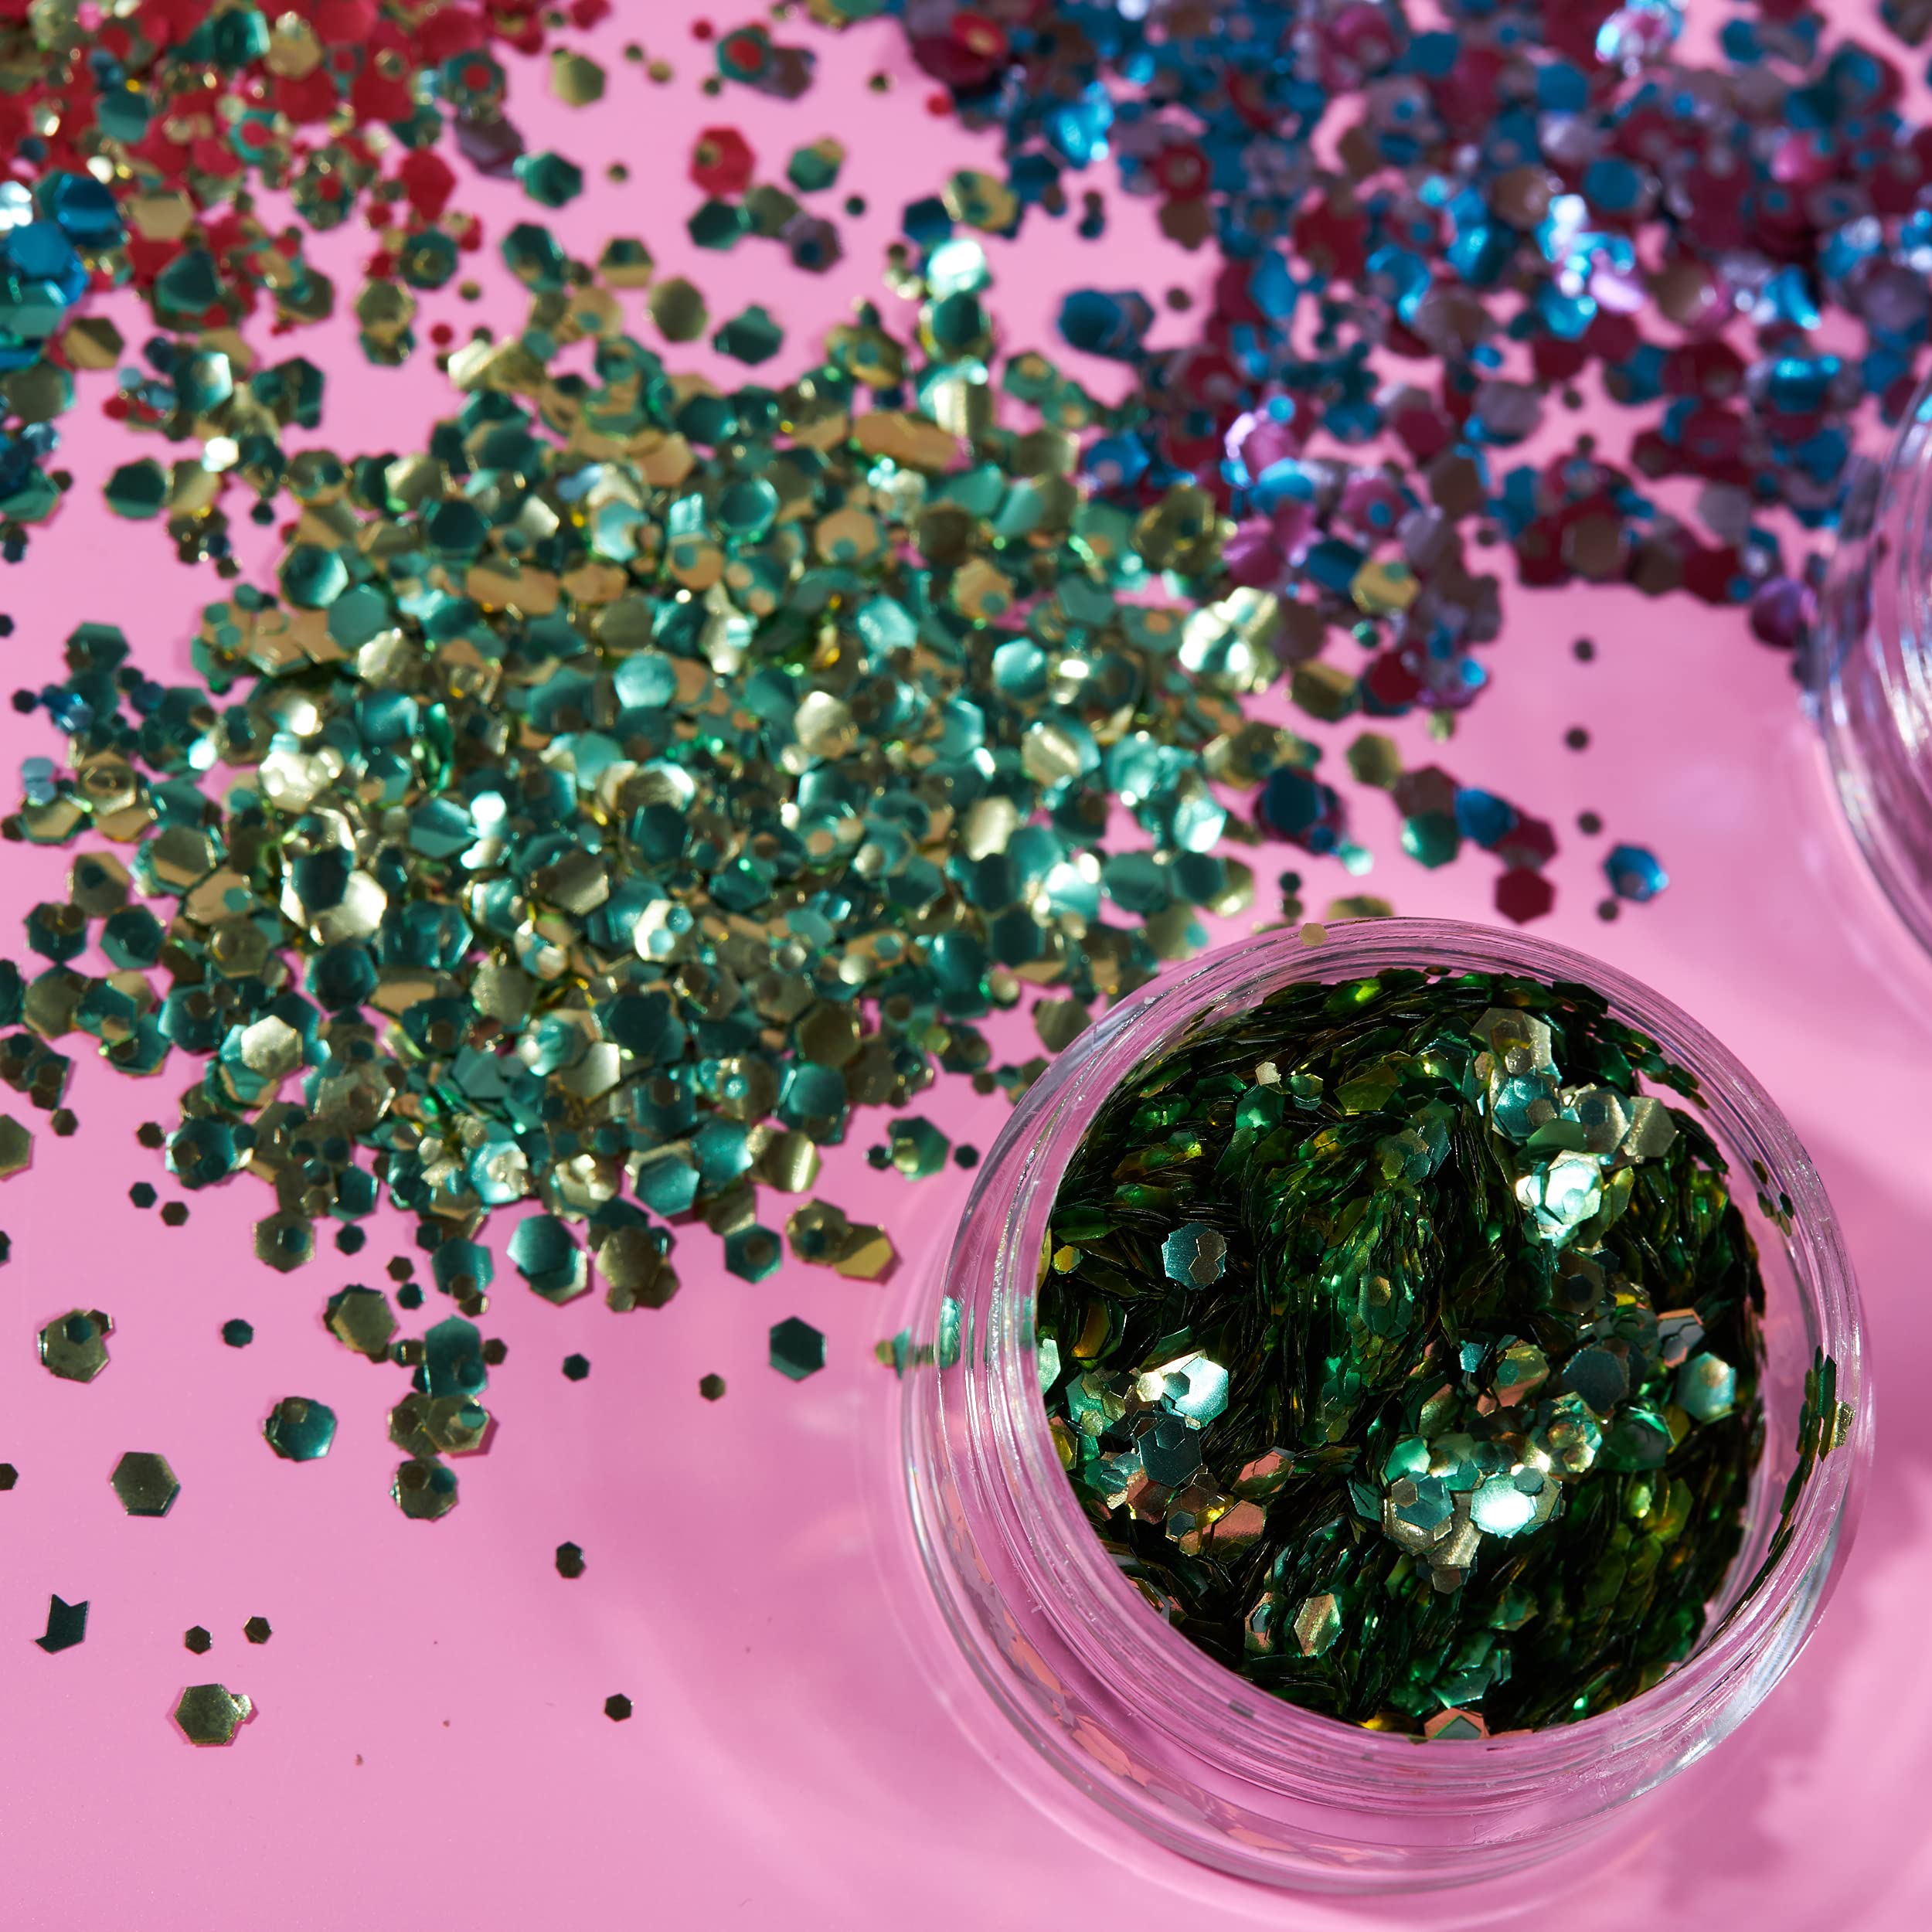 Mystic Bio Biodegradable Eco Chunky Glitter by Moon Glitter - 100% Cosmetic Bio Glitter for Face, Body, Nails, Hair and Lips - 3g - Shamrock